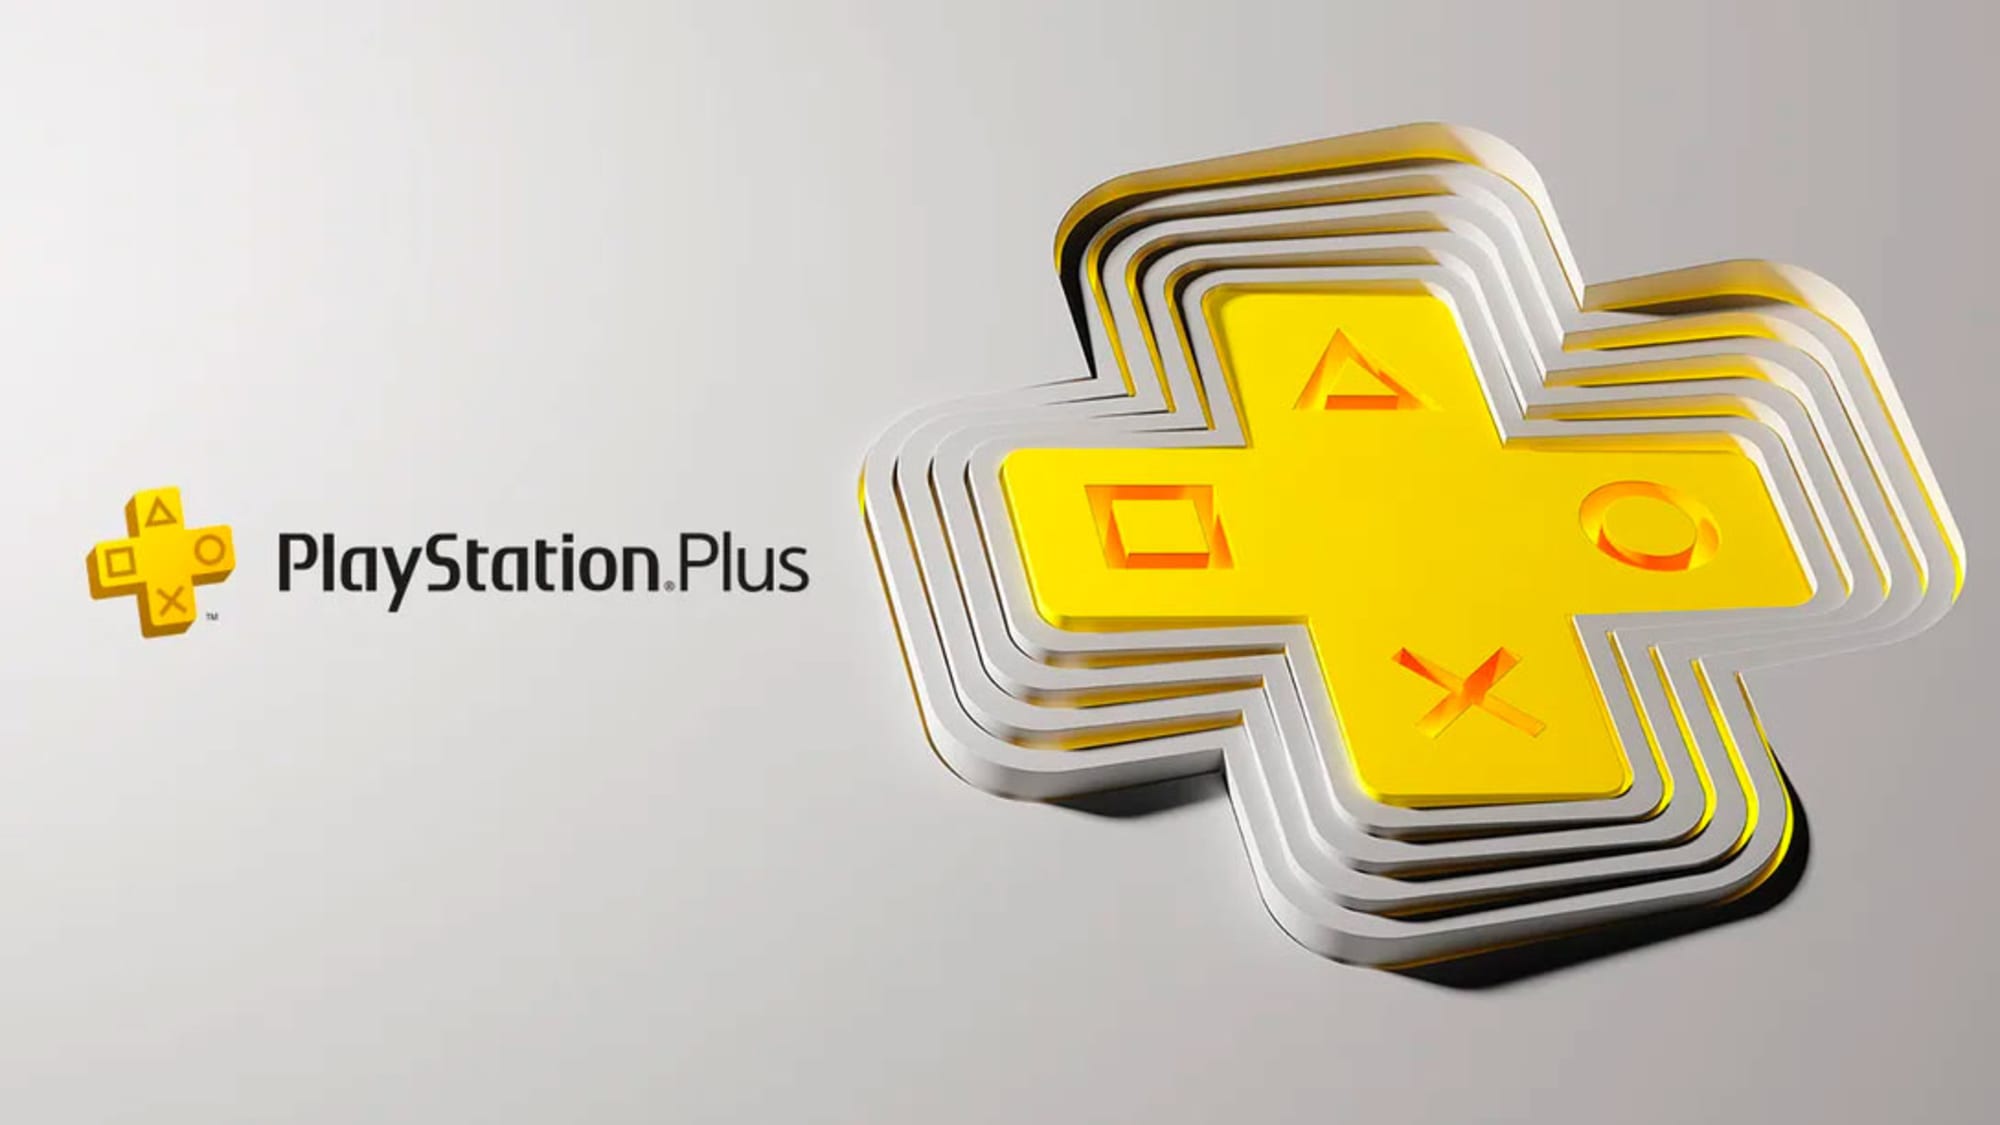 Plus: PS5 PS4 games for February 2023 confirmed